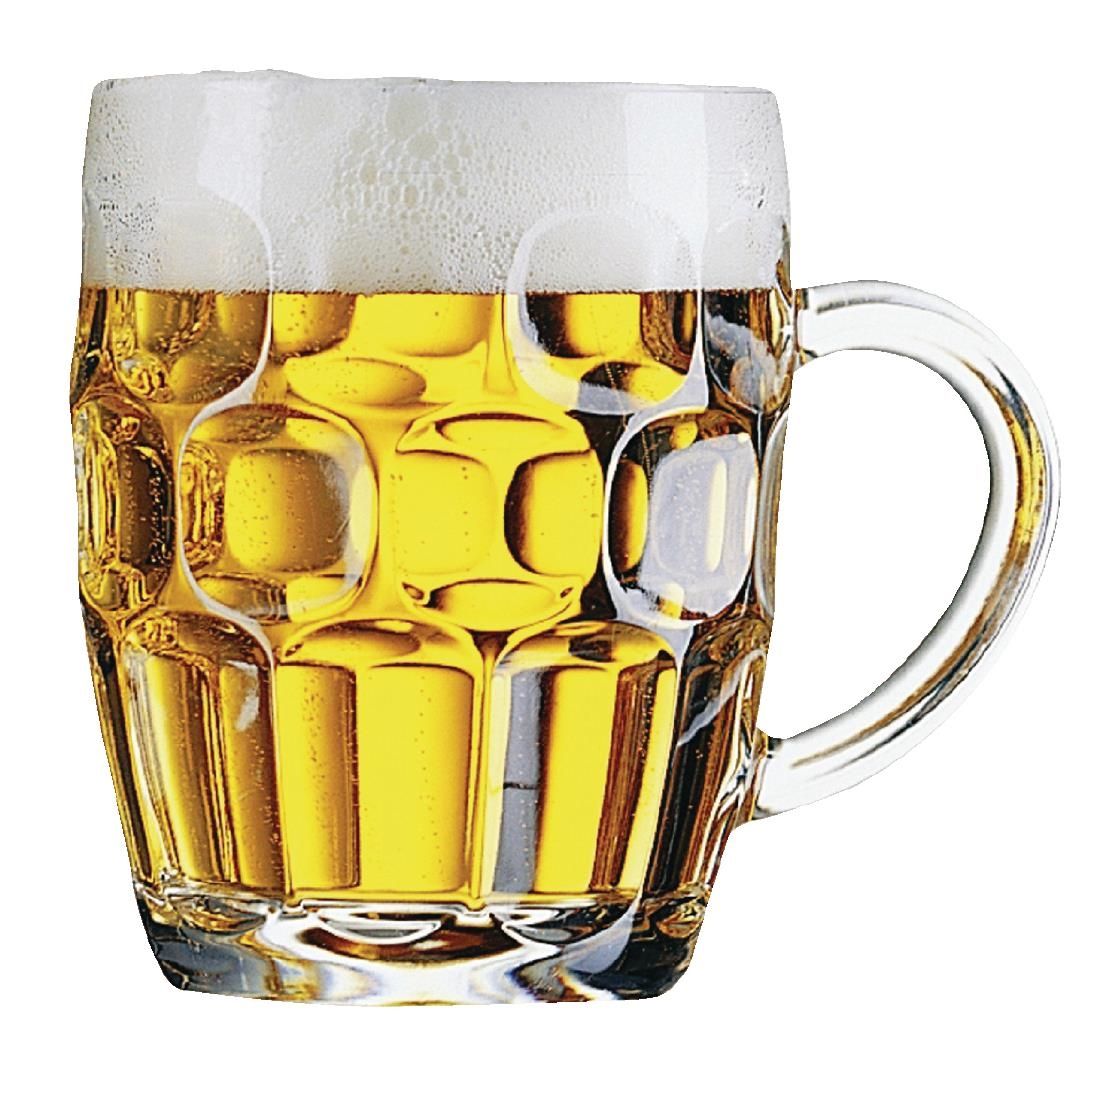 DP084 Arcoroc Britannia Dimple Pint Tankards 570ml CE Marked (Pack of 24) JD Catering Equipment Solutions Ltd